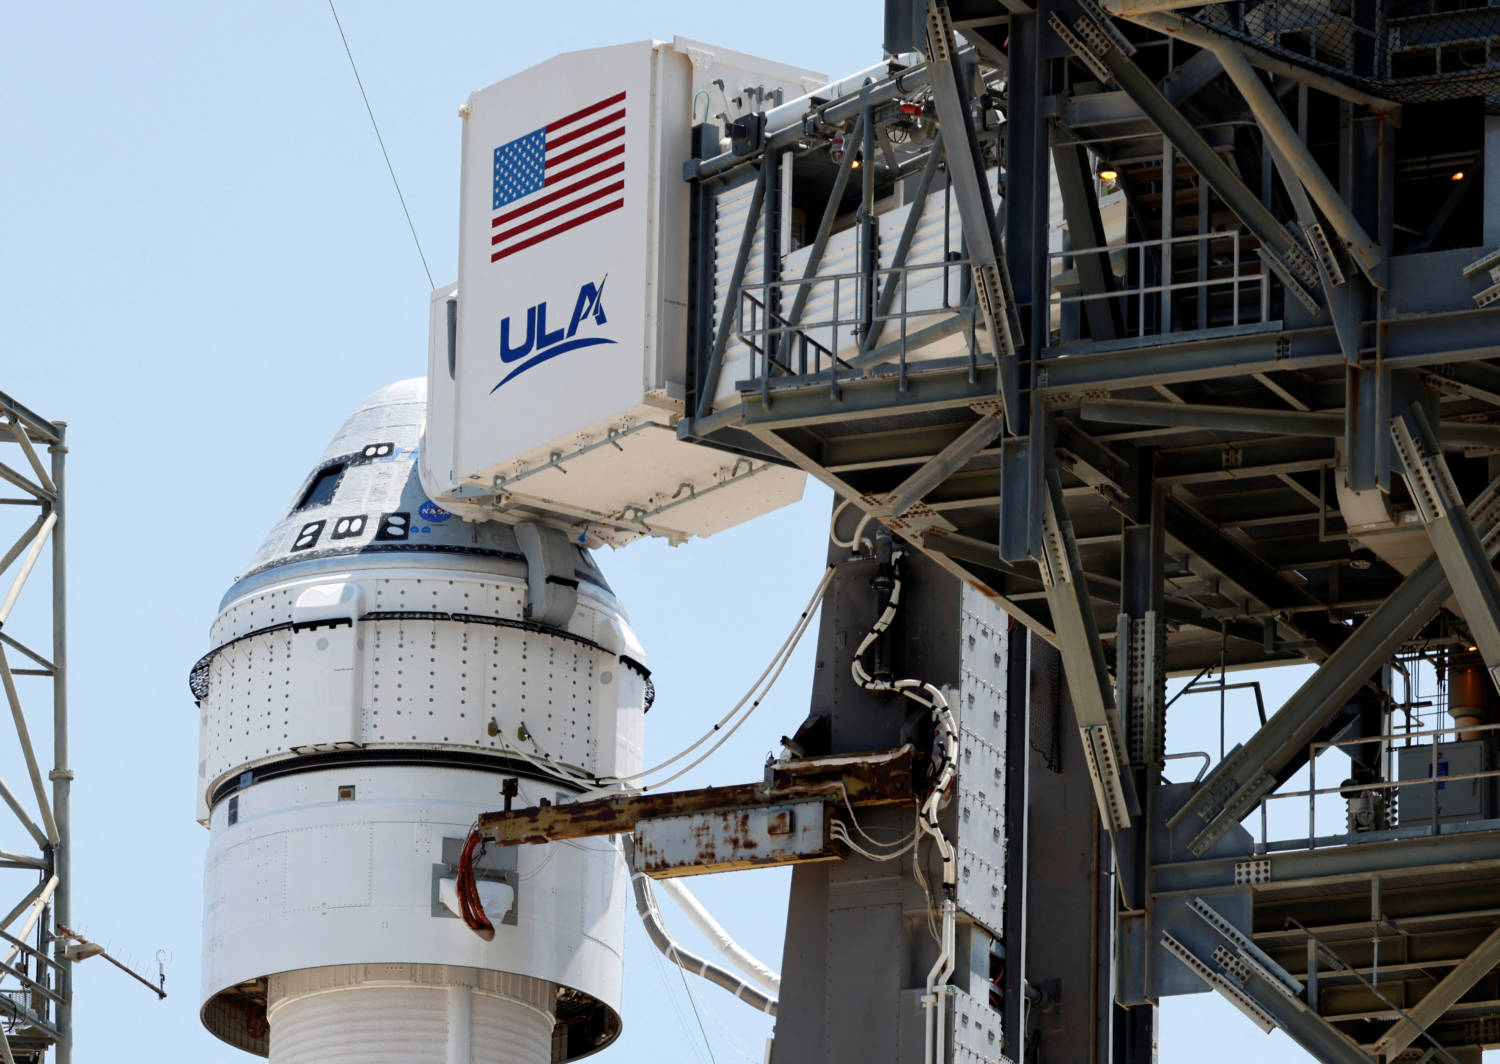 A United Launch Alliance Atlas V Rocket Stands On The Pad After The Launch Of Two Astronauts Aboard Boeing's Starliner 1 Crew Flight Test (cft) Was Delayed, In Cape Canaveral